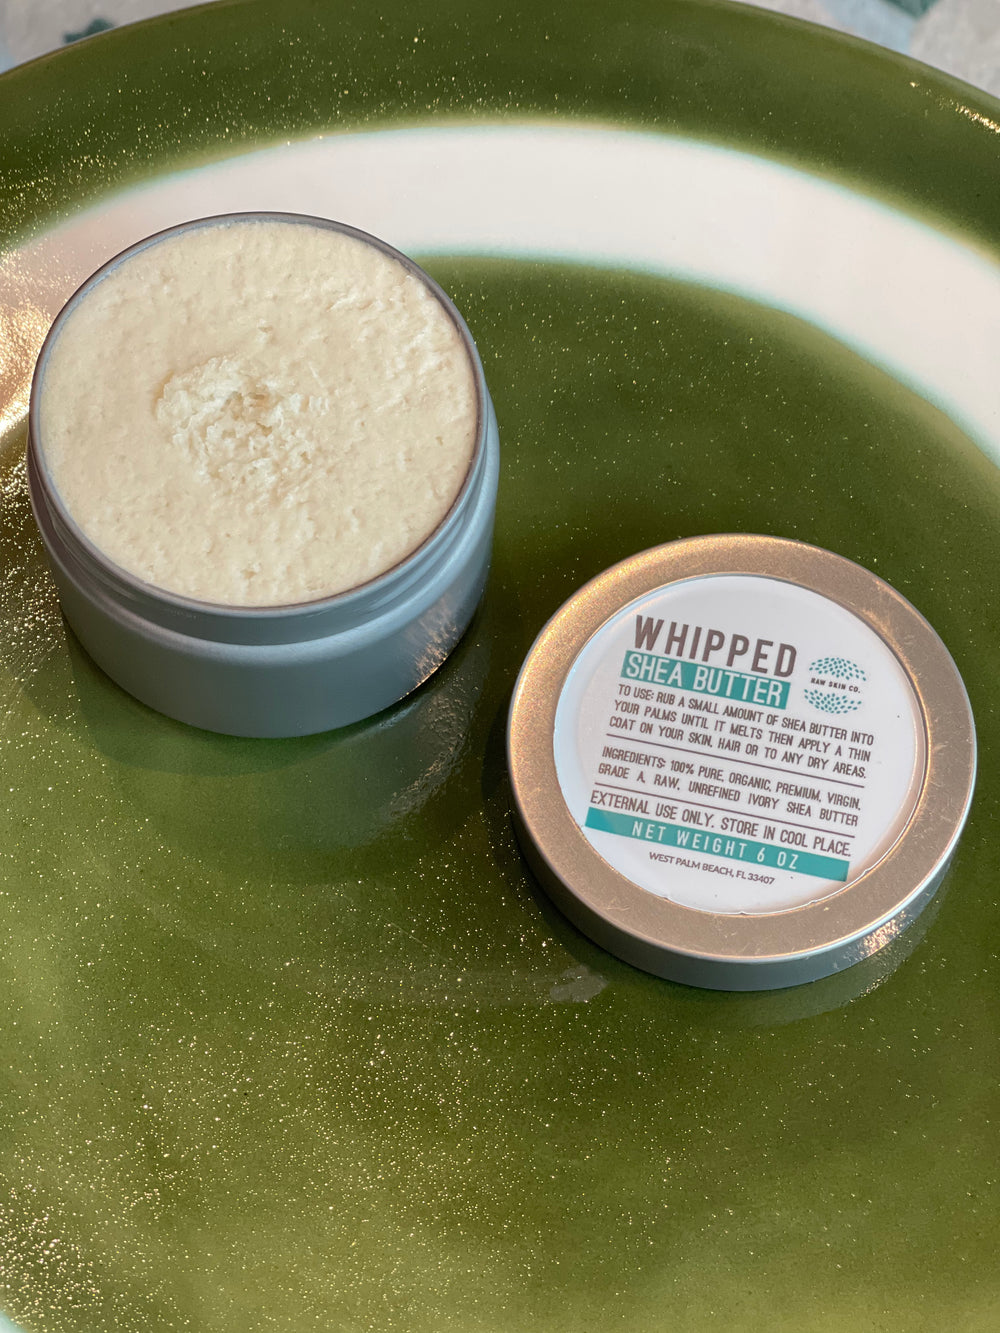 Whipped Ivory Shea Butter